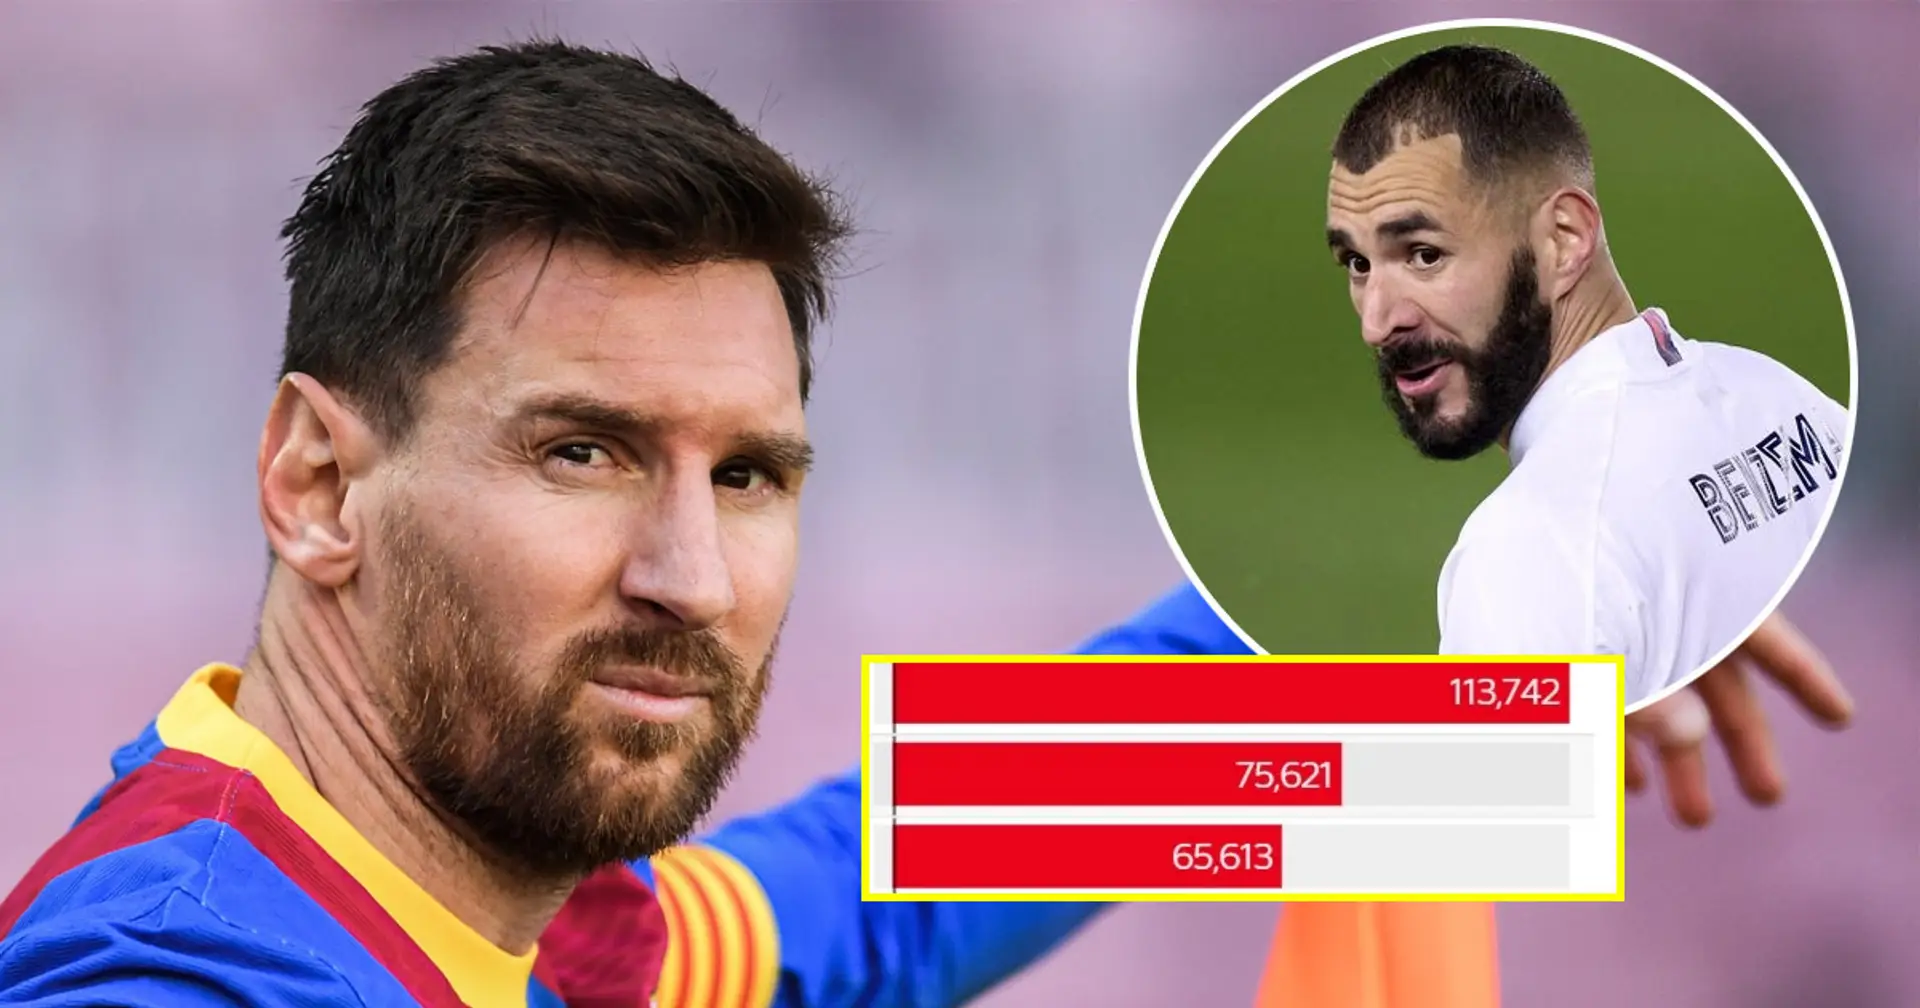 Leo Messi leads La Liga Power Rankings by nearly 40% points over runner-up Karim Benzema